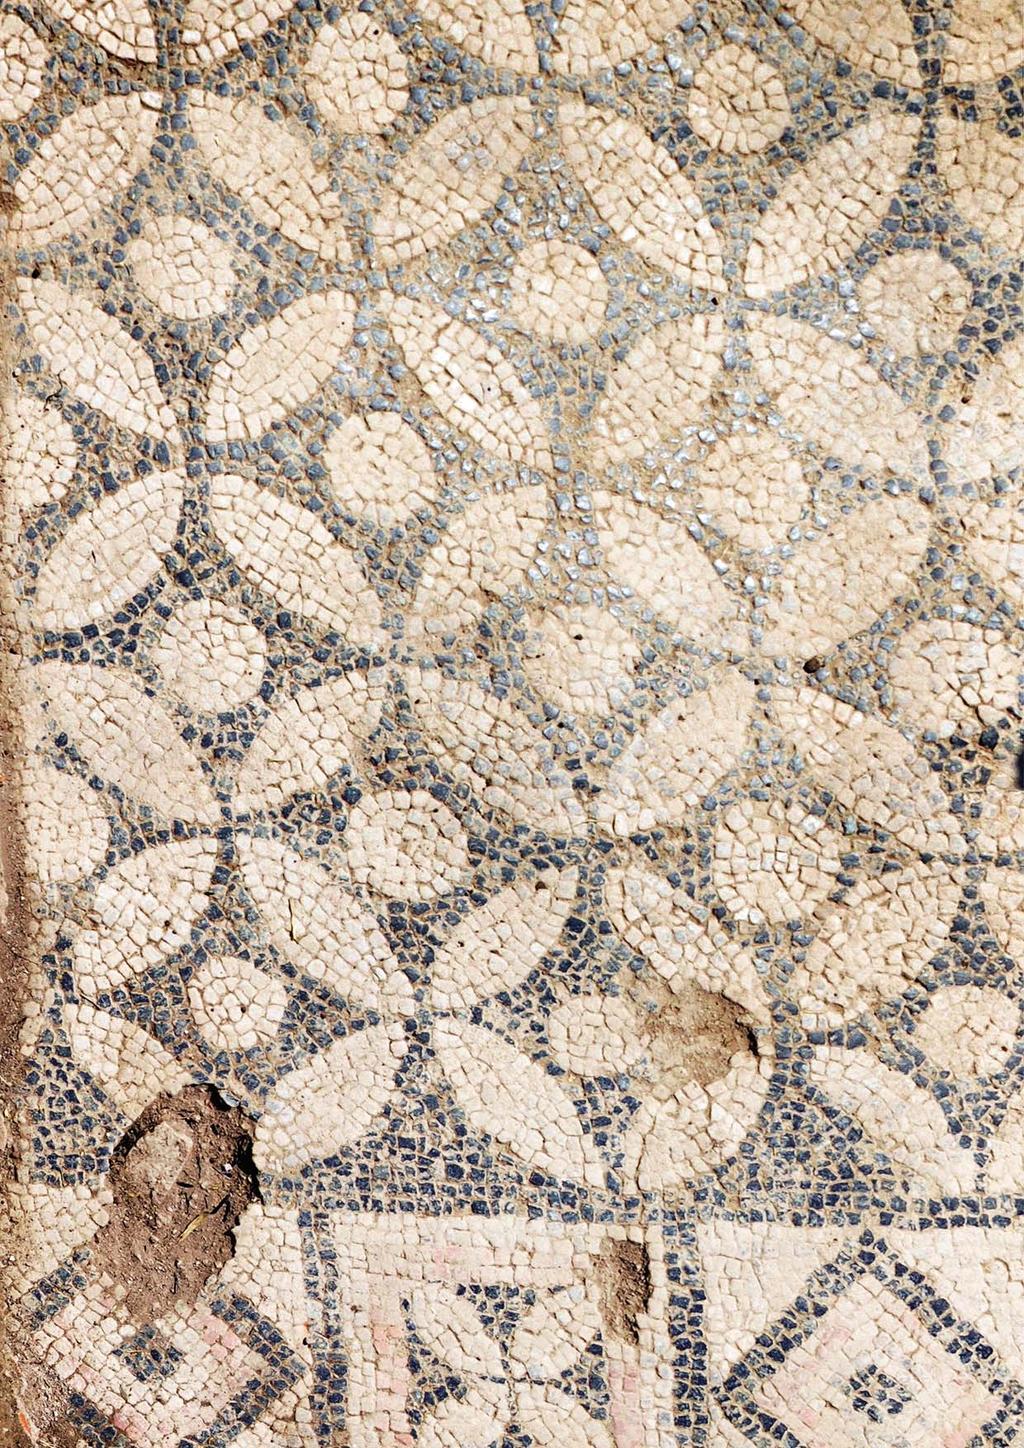 NEWSLETTER Mosaic in Ulpiana Discovered during Regional